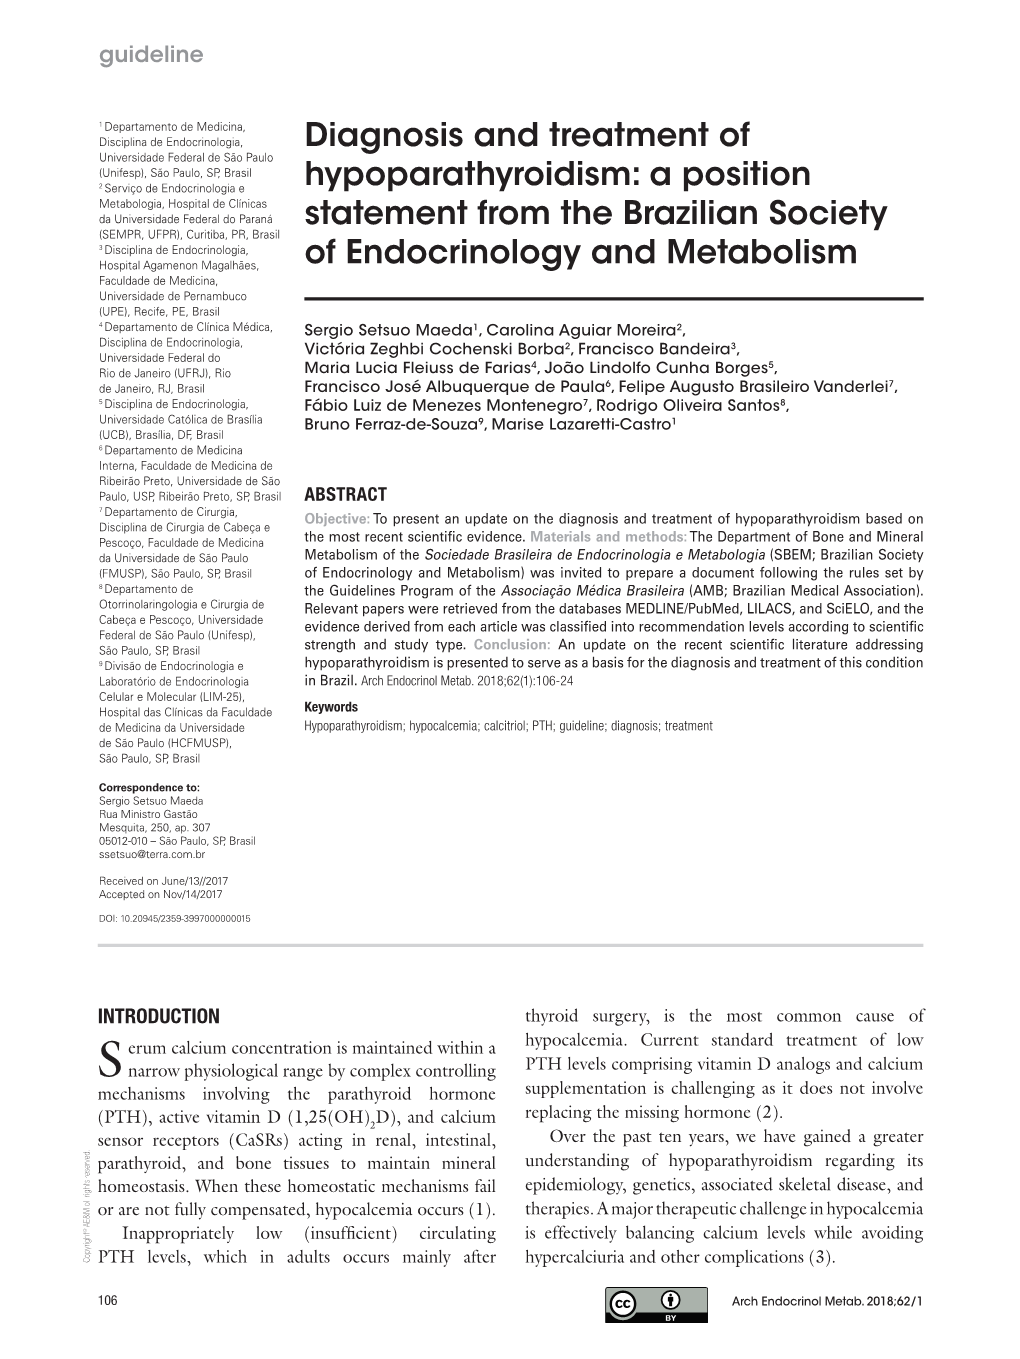 Diagnosis and Treatment of Hypoparathyroidism: a Position Statement from the Brazilian Society of Endocrinology and Metabolism